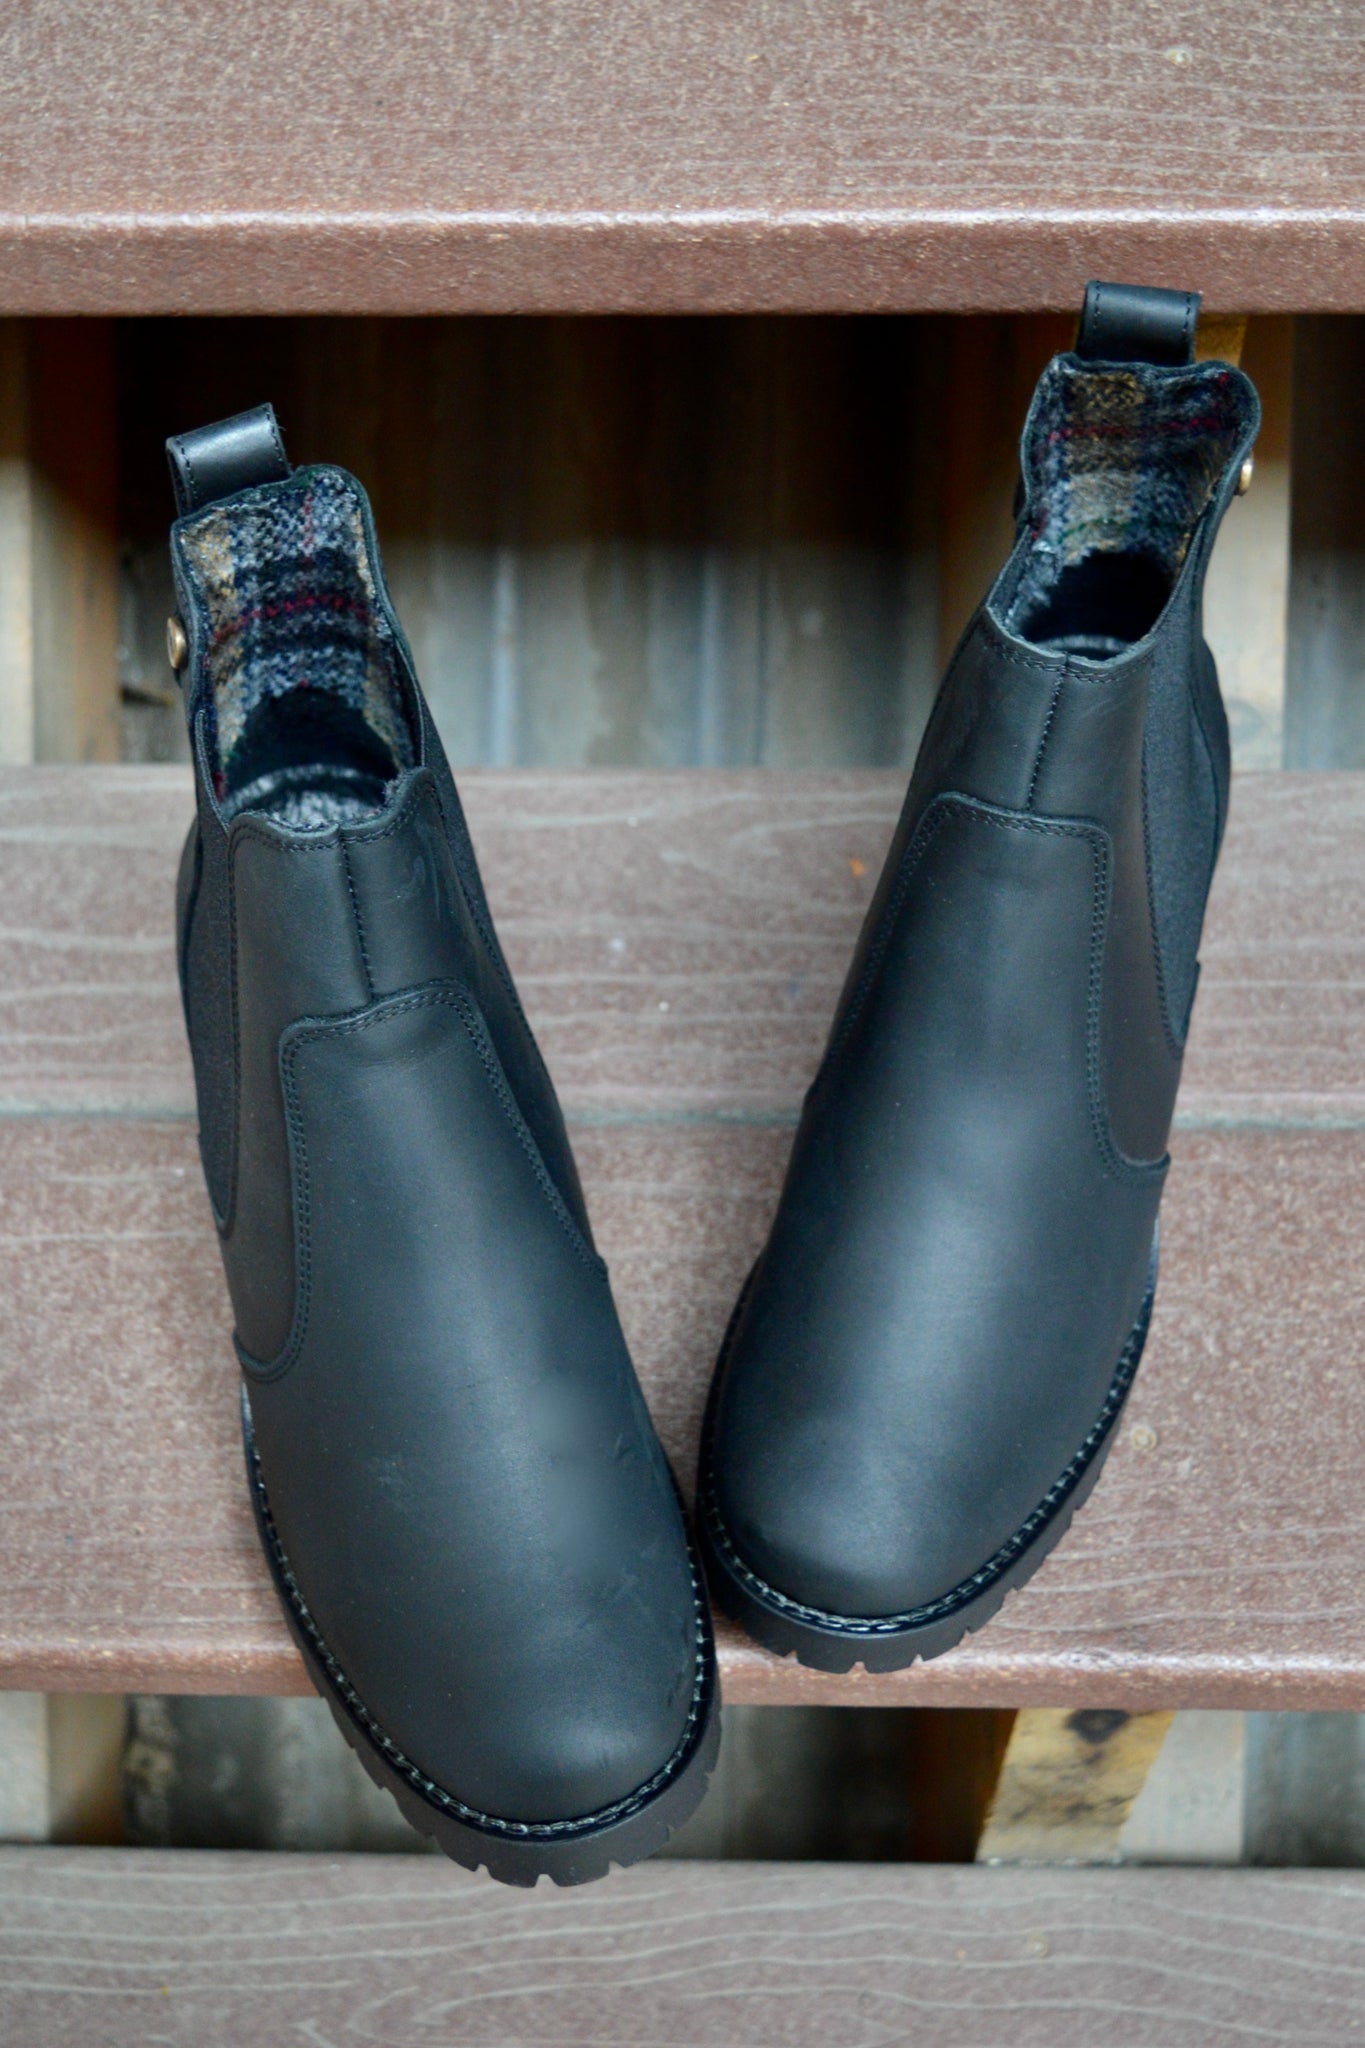 File:VegShoes Airseal range of boots and shoes.jpg - Wikimedia Commons